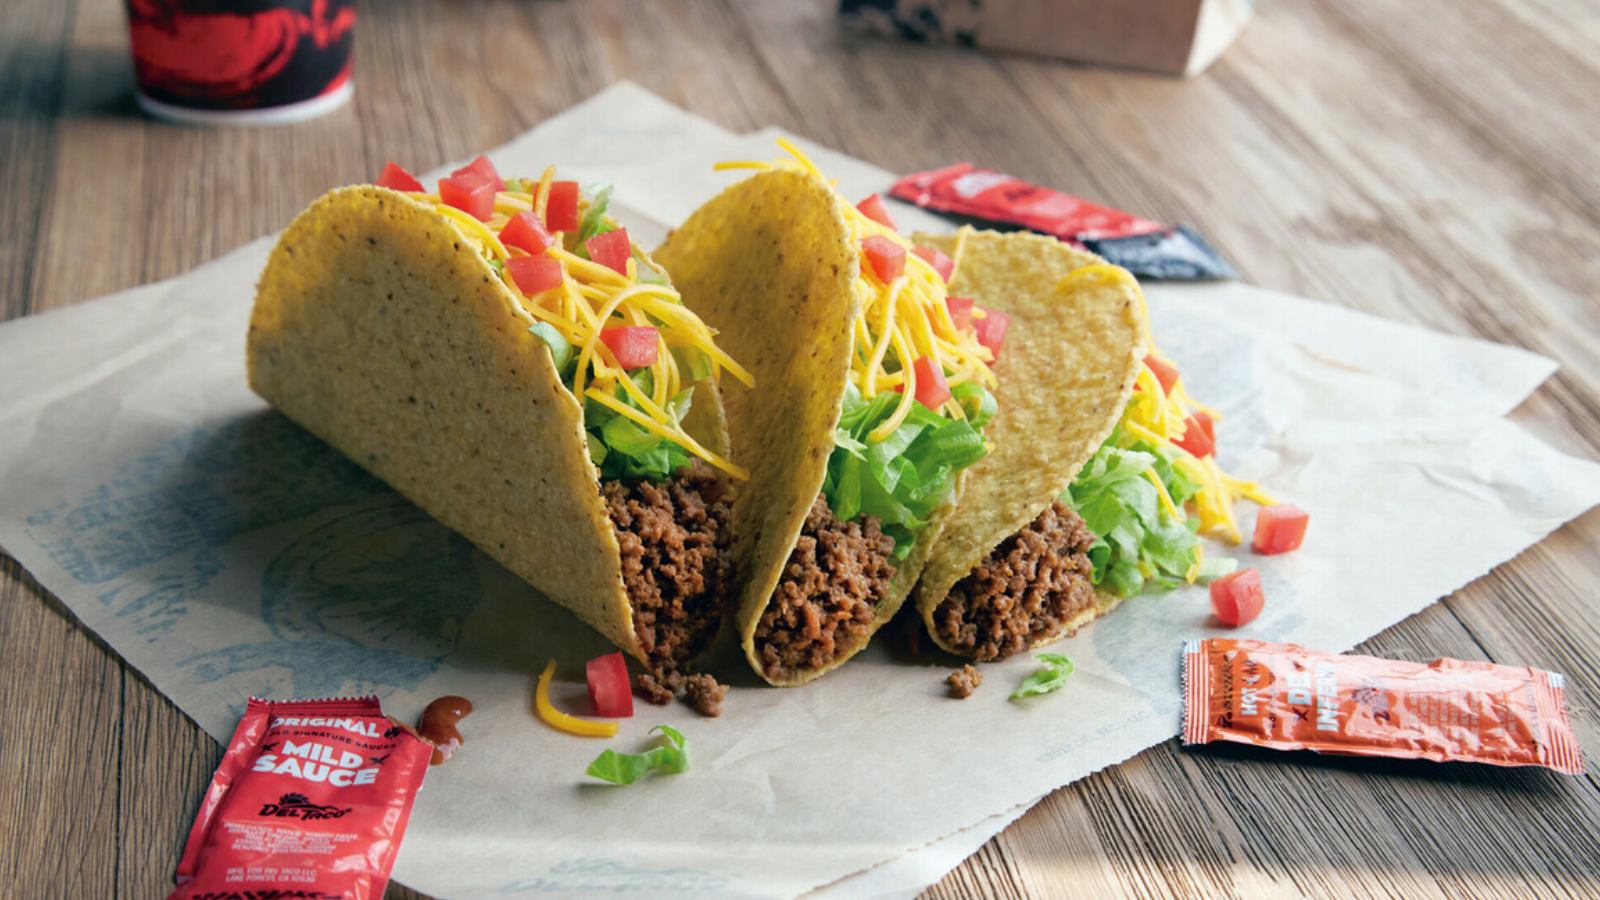 Best Taco Franchises to Own